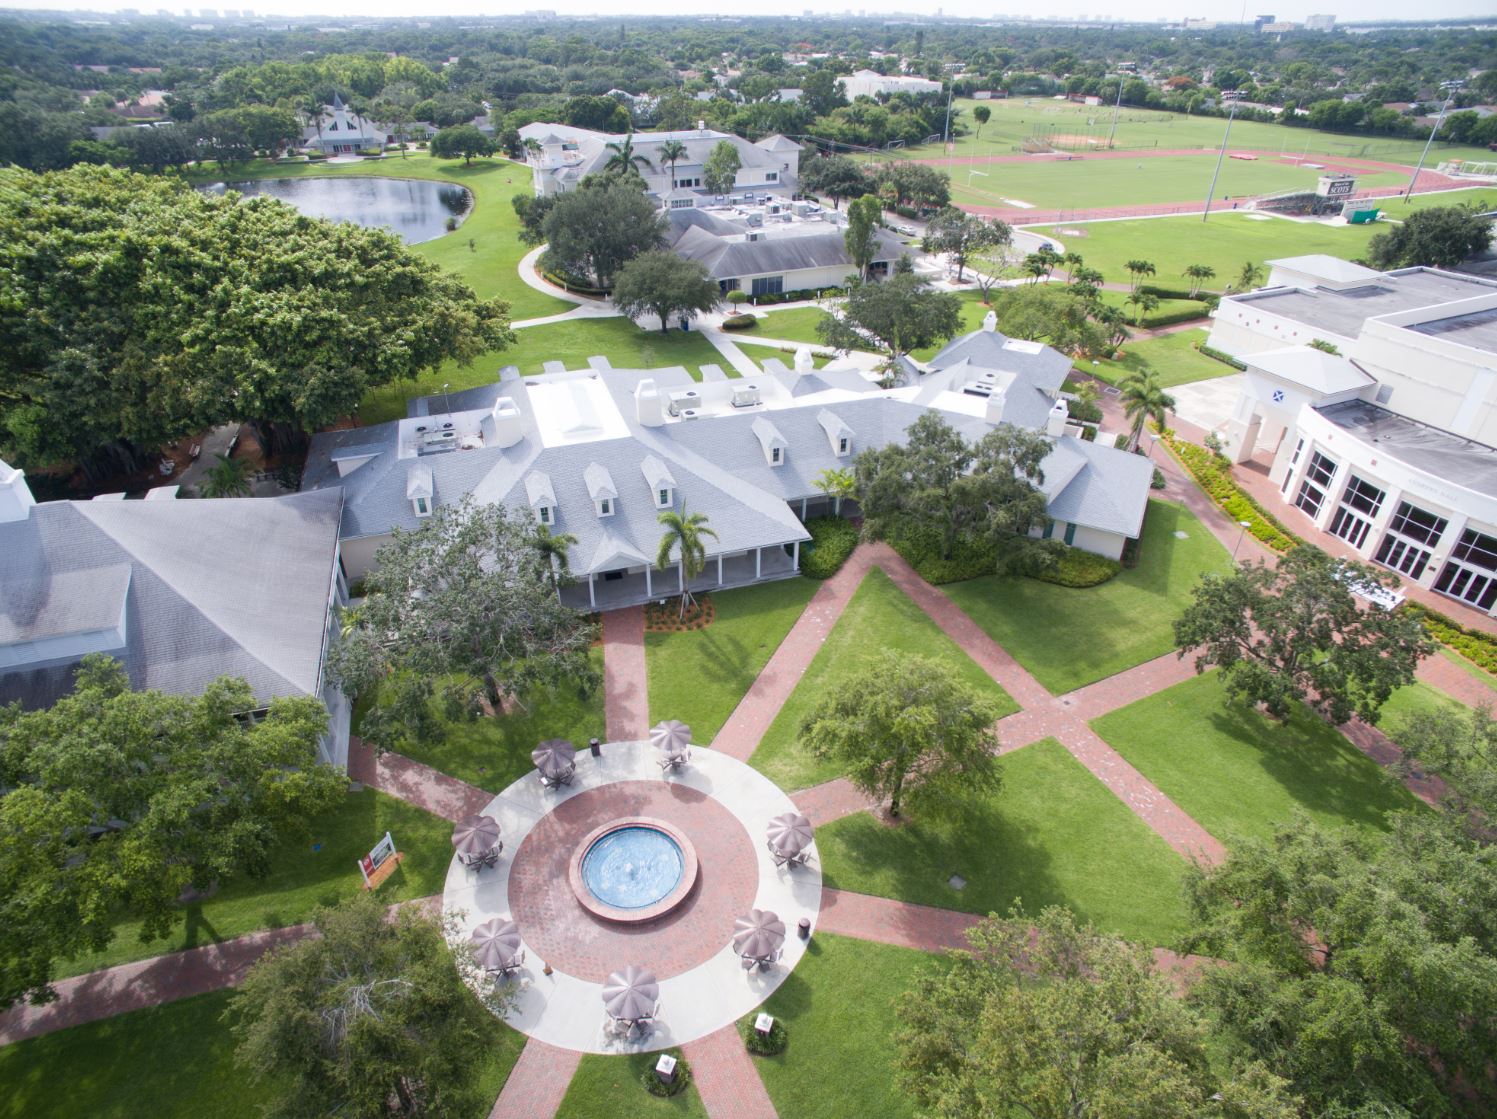 A drone view of the upper school campus of Saint Andrew's School in Boca Raton.